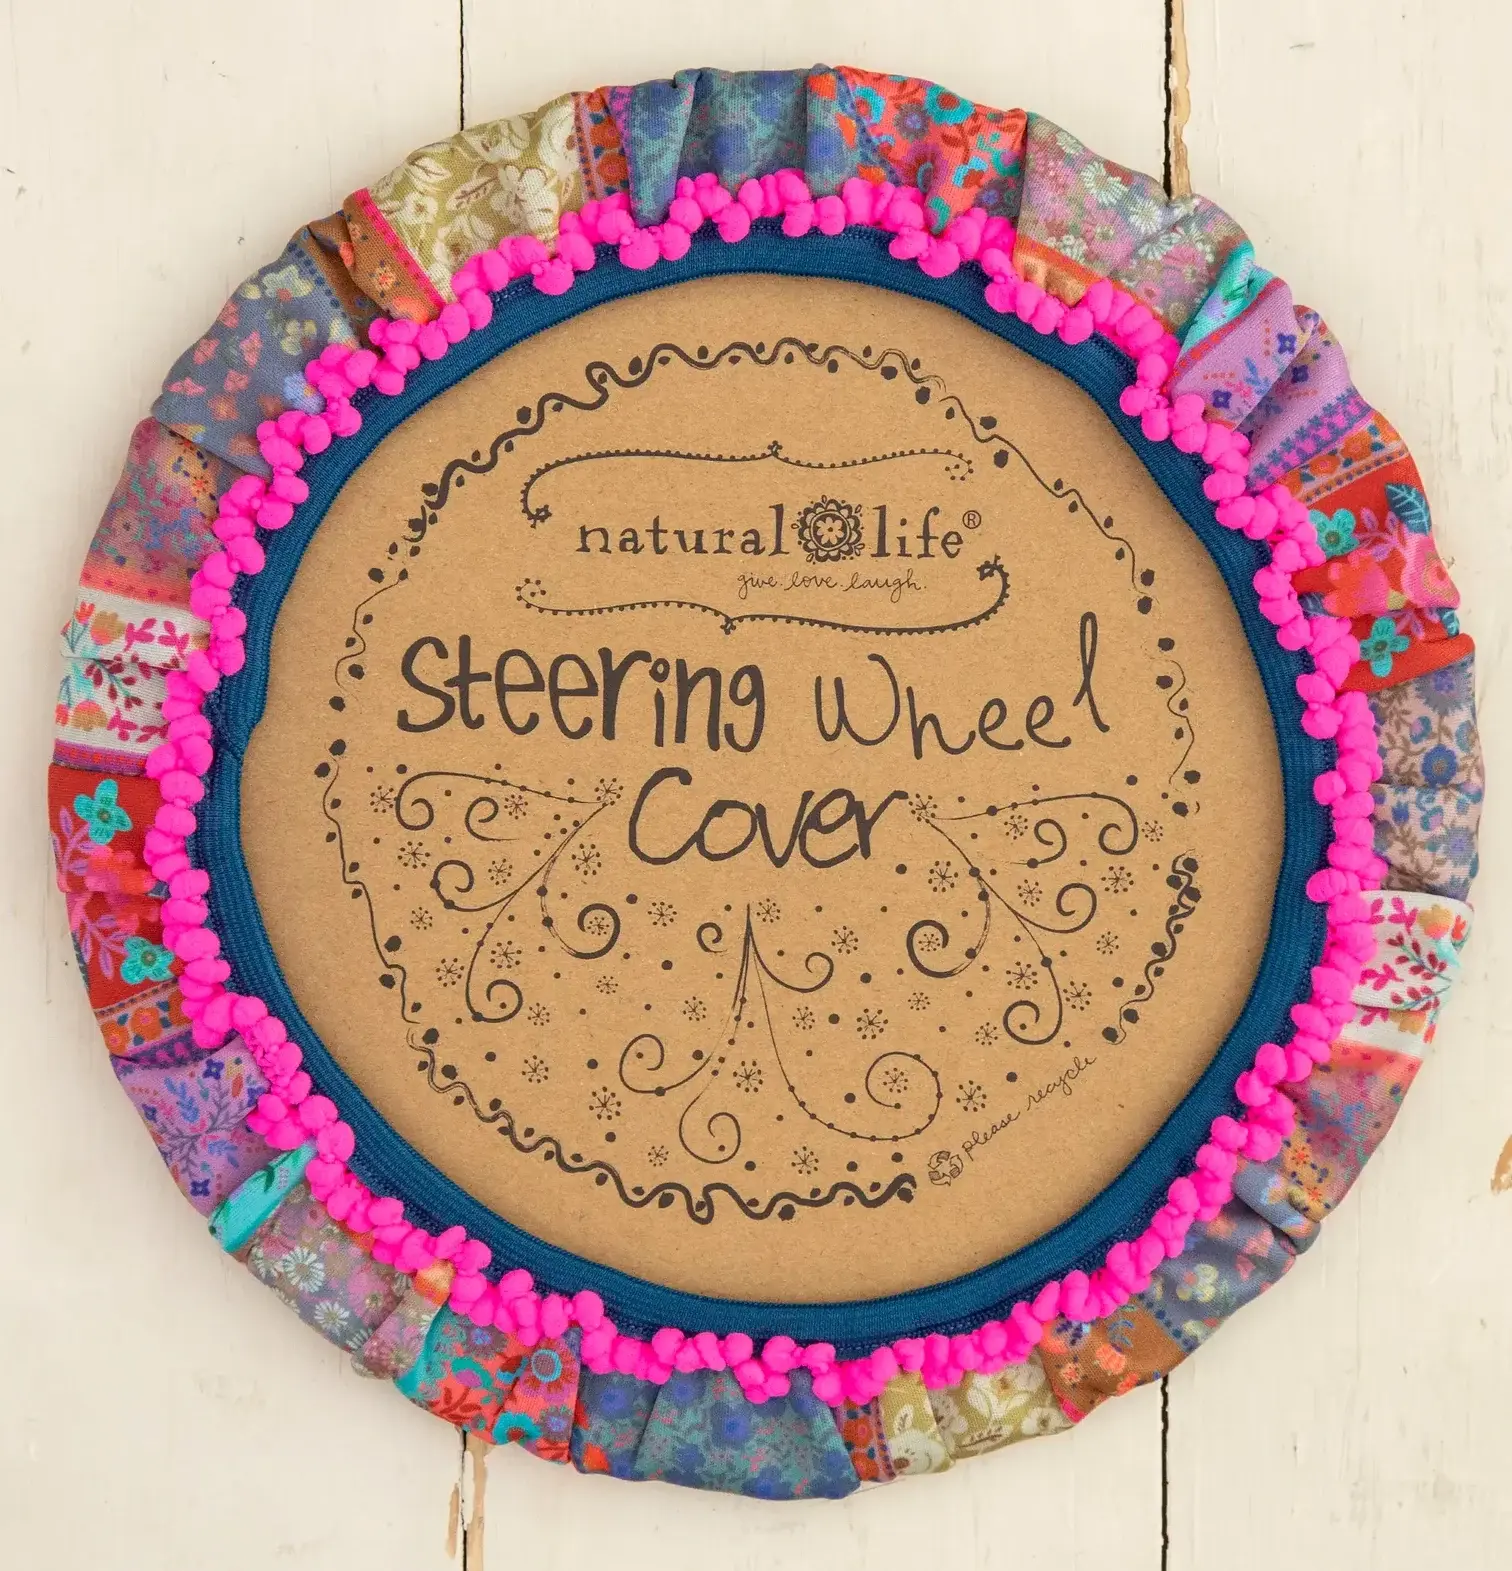 Natural Life Steering Wheel Cover- Patchwork